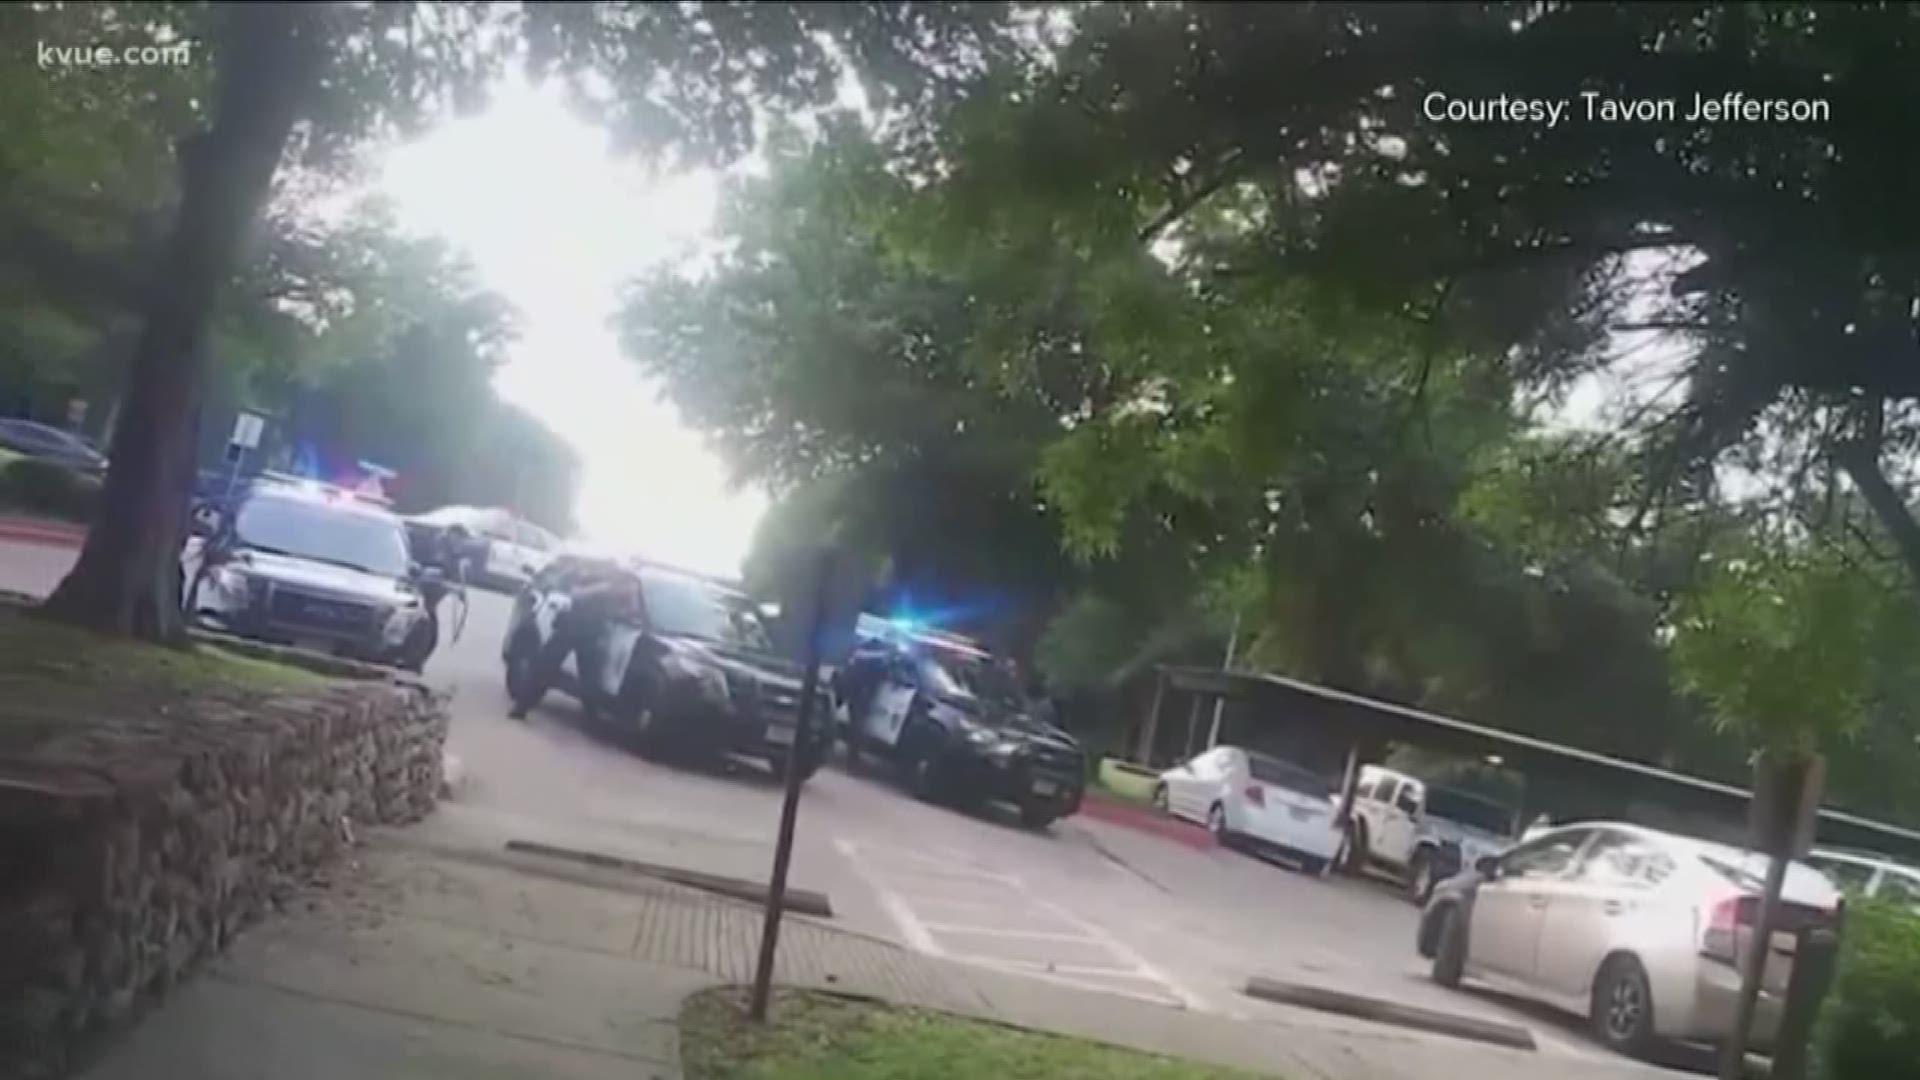 An Austin police officer involved in a deadly shooting has filed a motion to stop body cam video of the shooting from being made public.